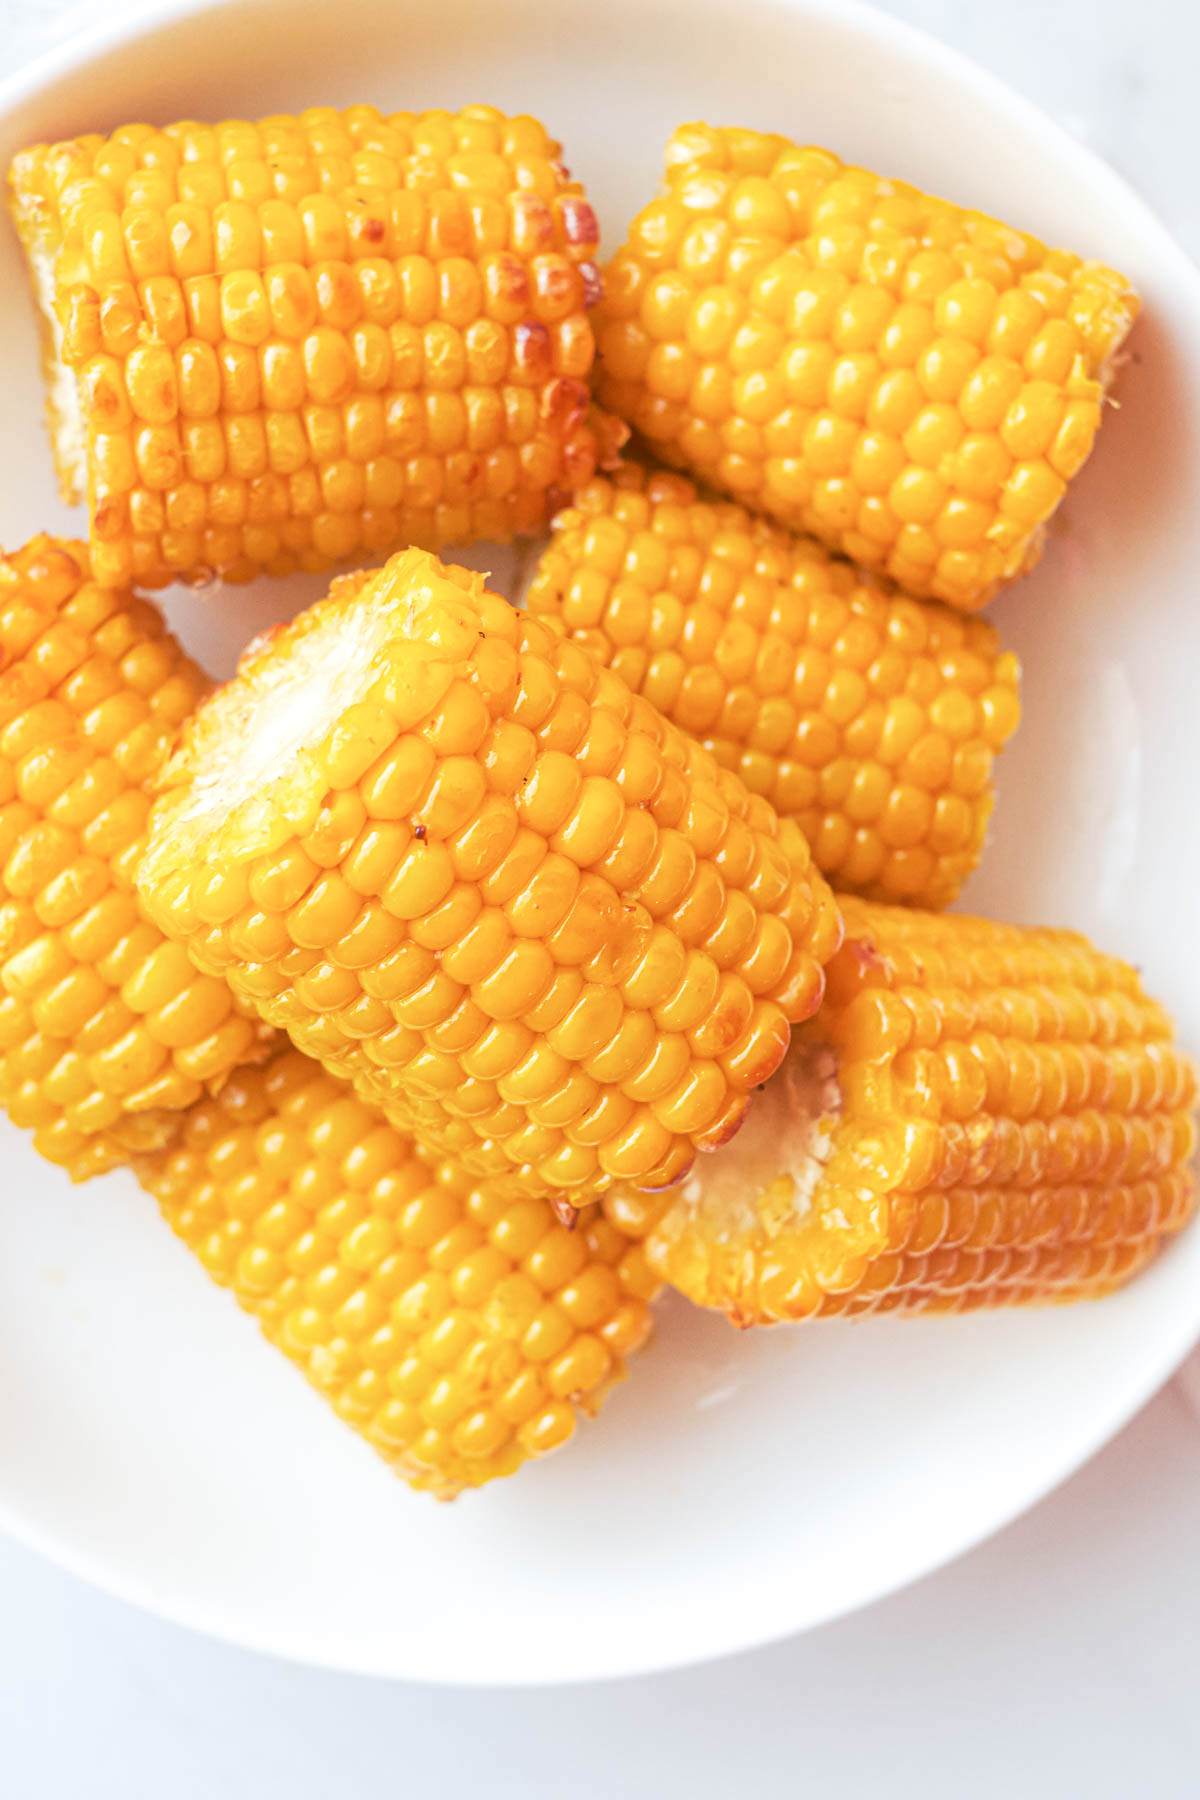 christal ramirez share pictures of corn on the cob photos